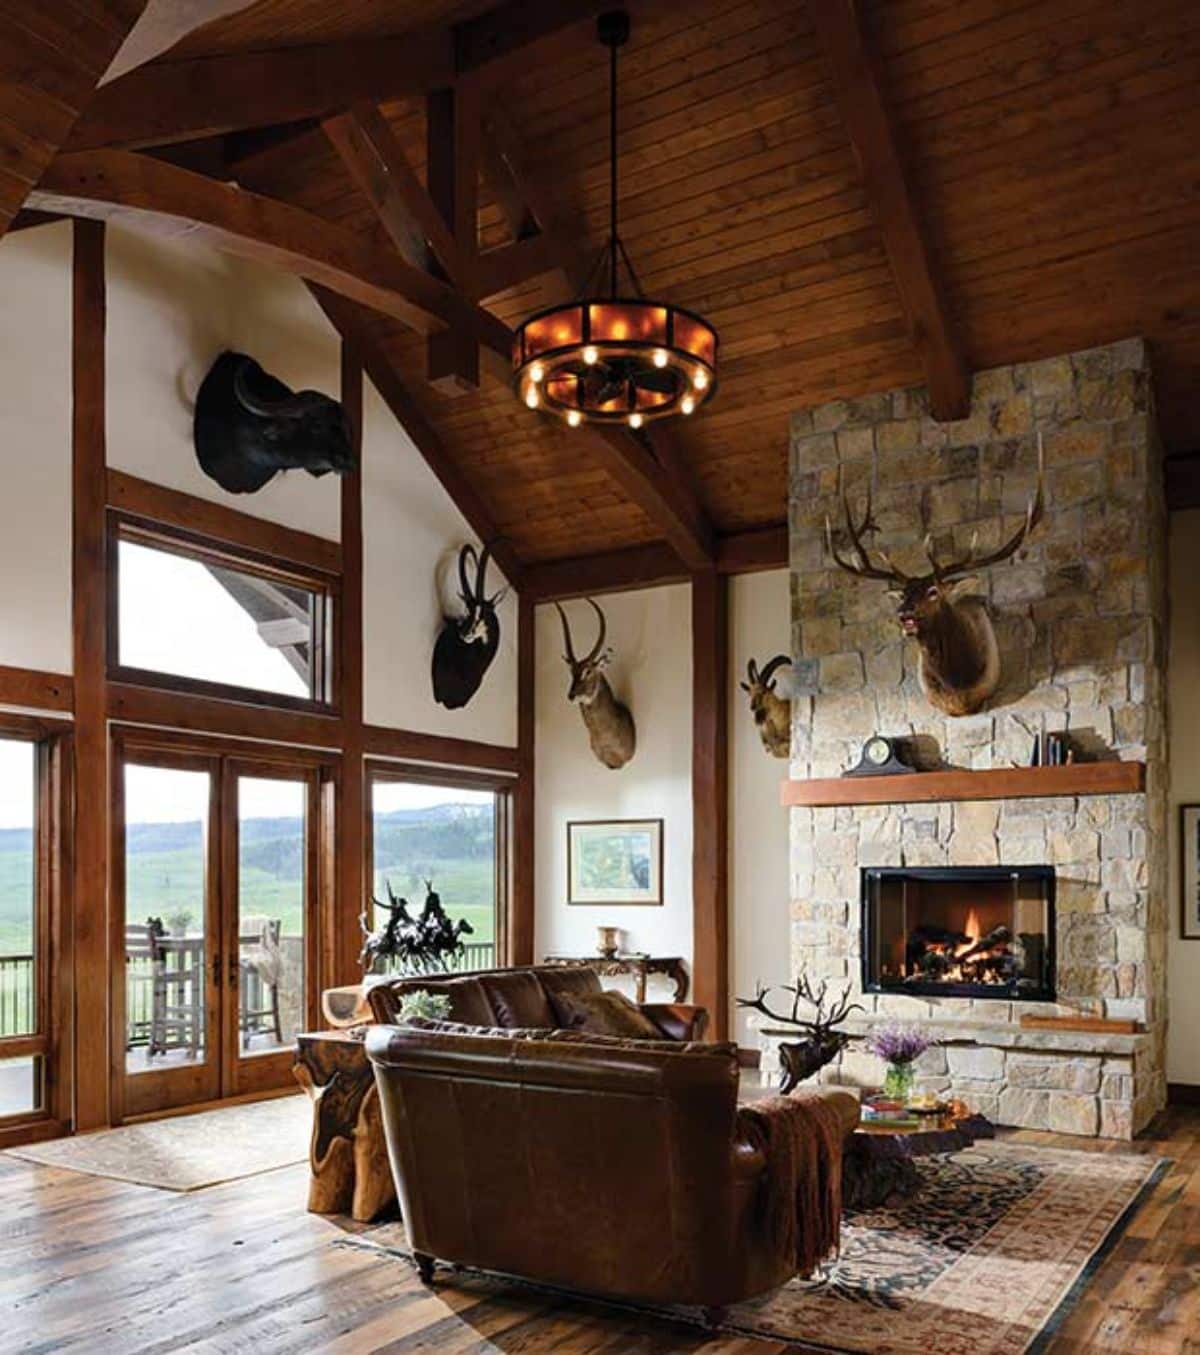 fireplace on back wall of log cabin with wall of windows on left